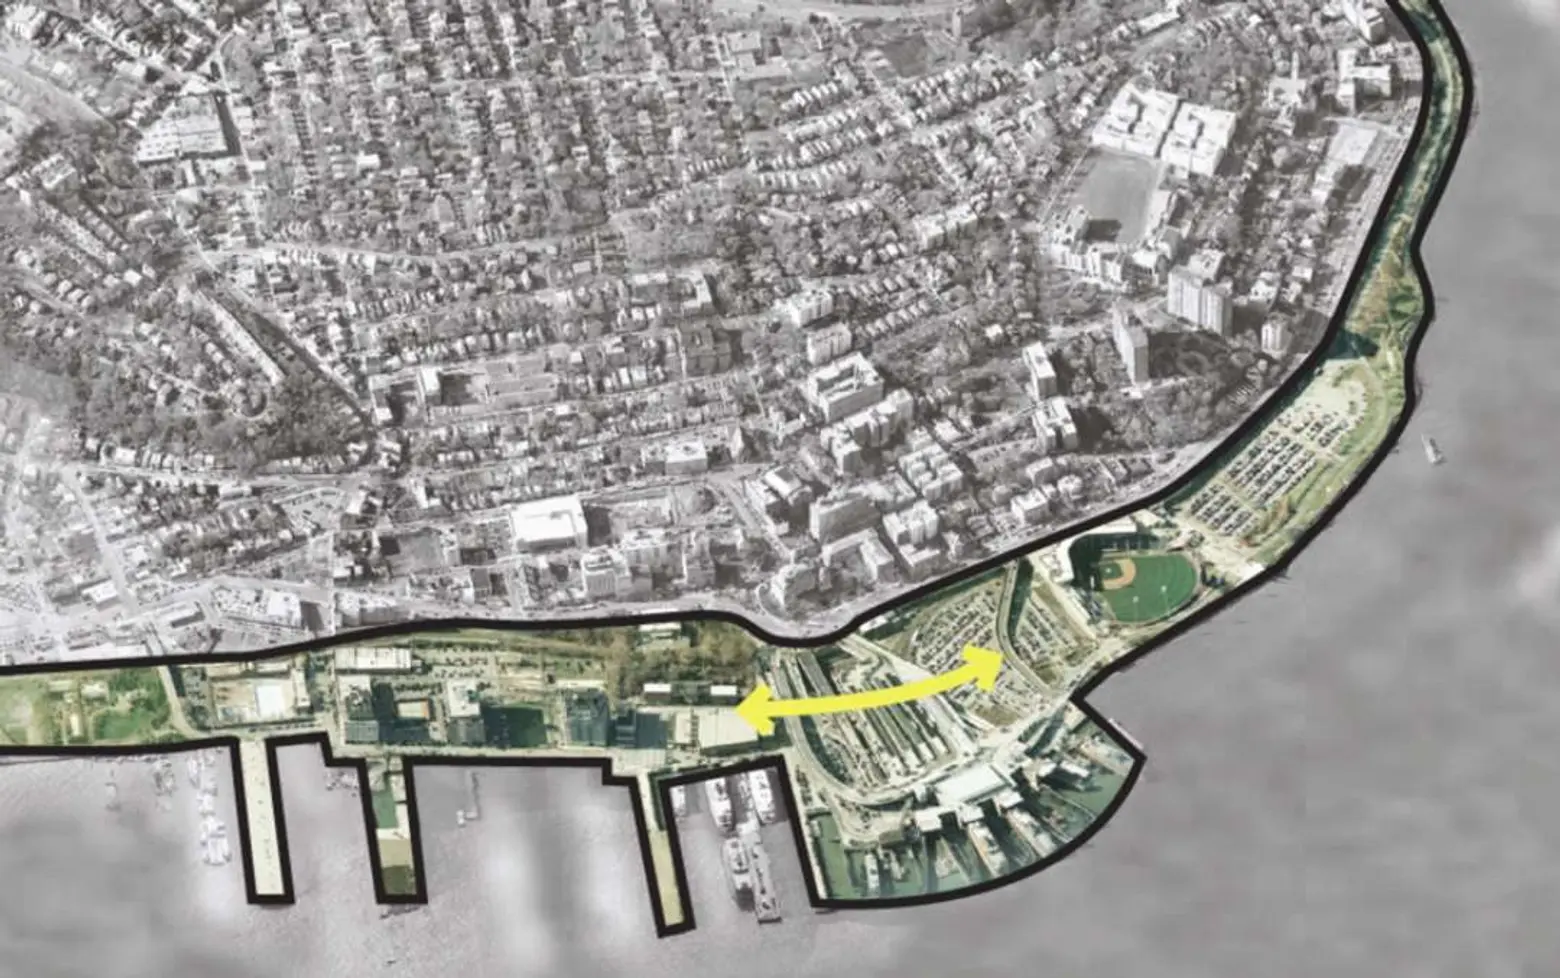 The Energetic City, Design Trust for Public Space, Staten Island Arts, North Shore